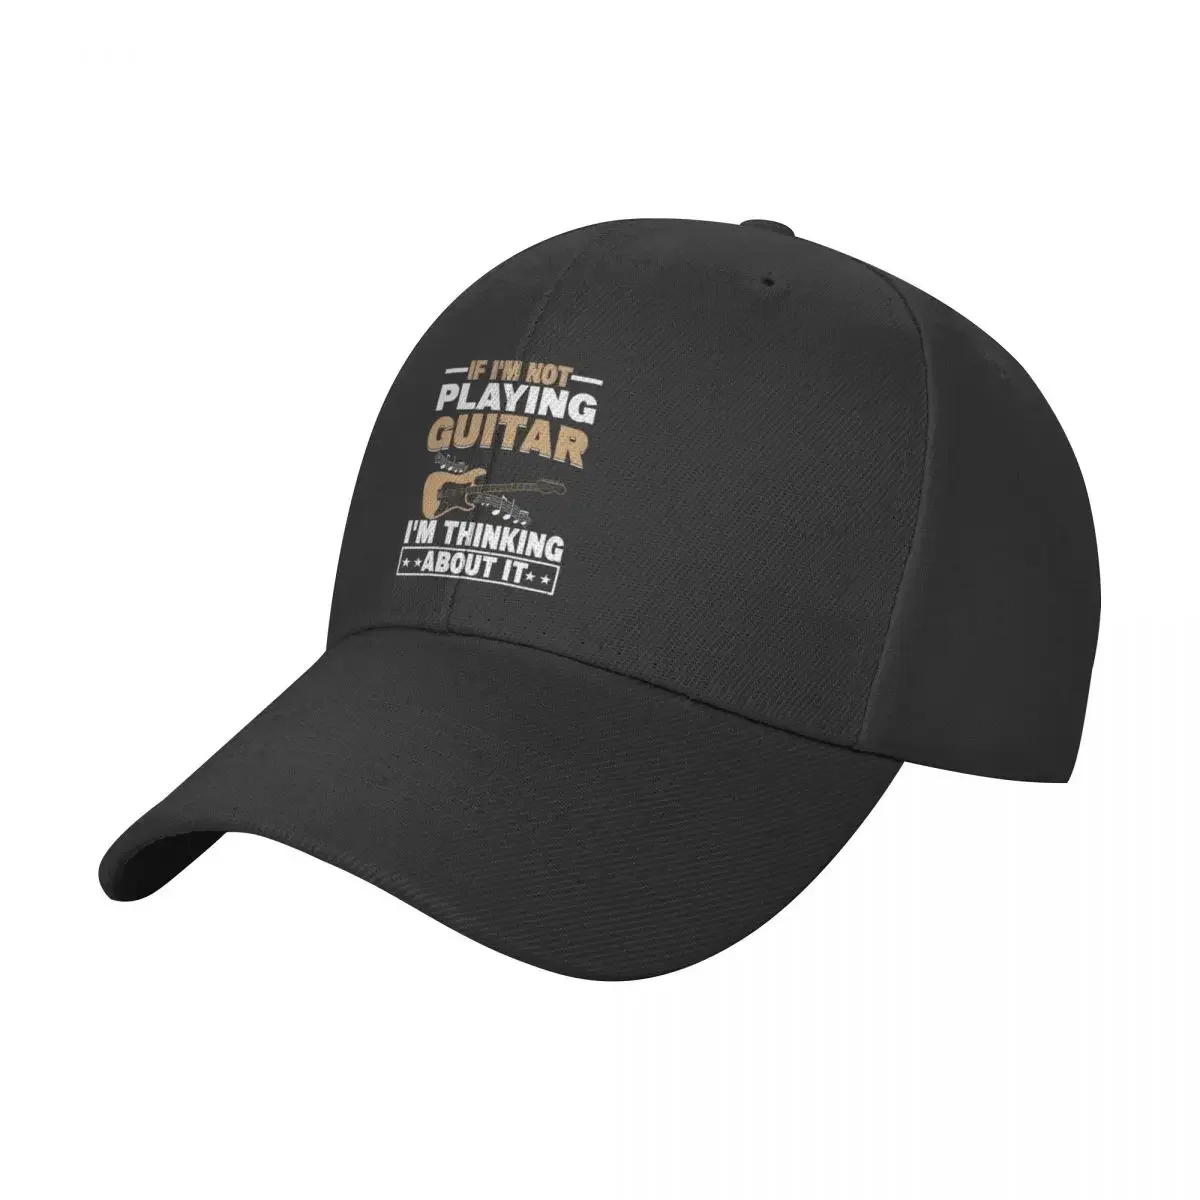 

If I'm Not Playing Guitar I'm Thinking About It Funny Guitarist Bassist Bass Guitar PlayerCap Baseball Cap